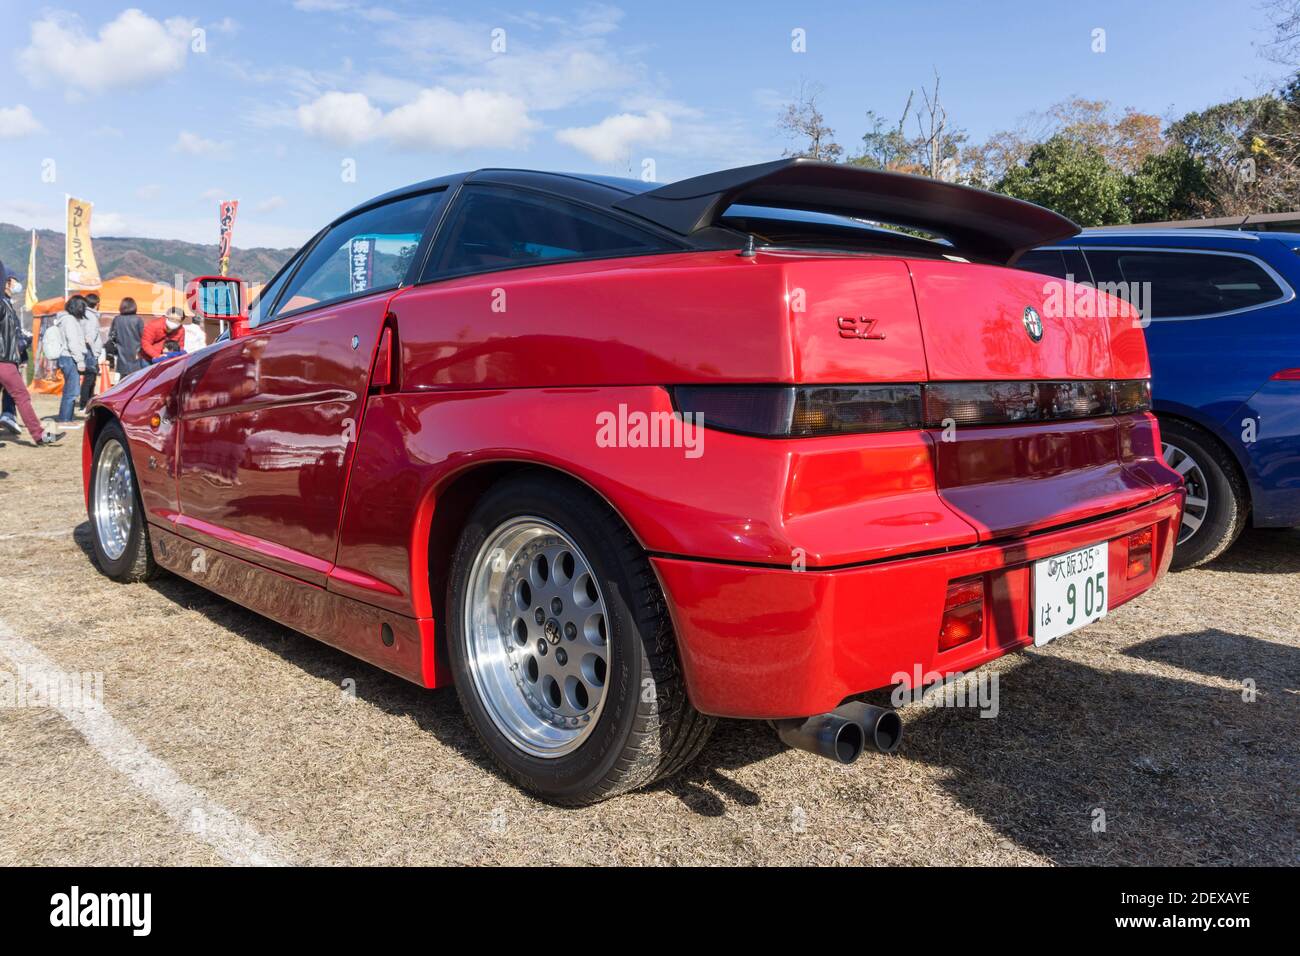 Rear view of a red Alfa Romeo SZ sports coupe outside in sunshine Stock Photo